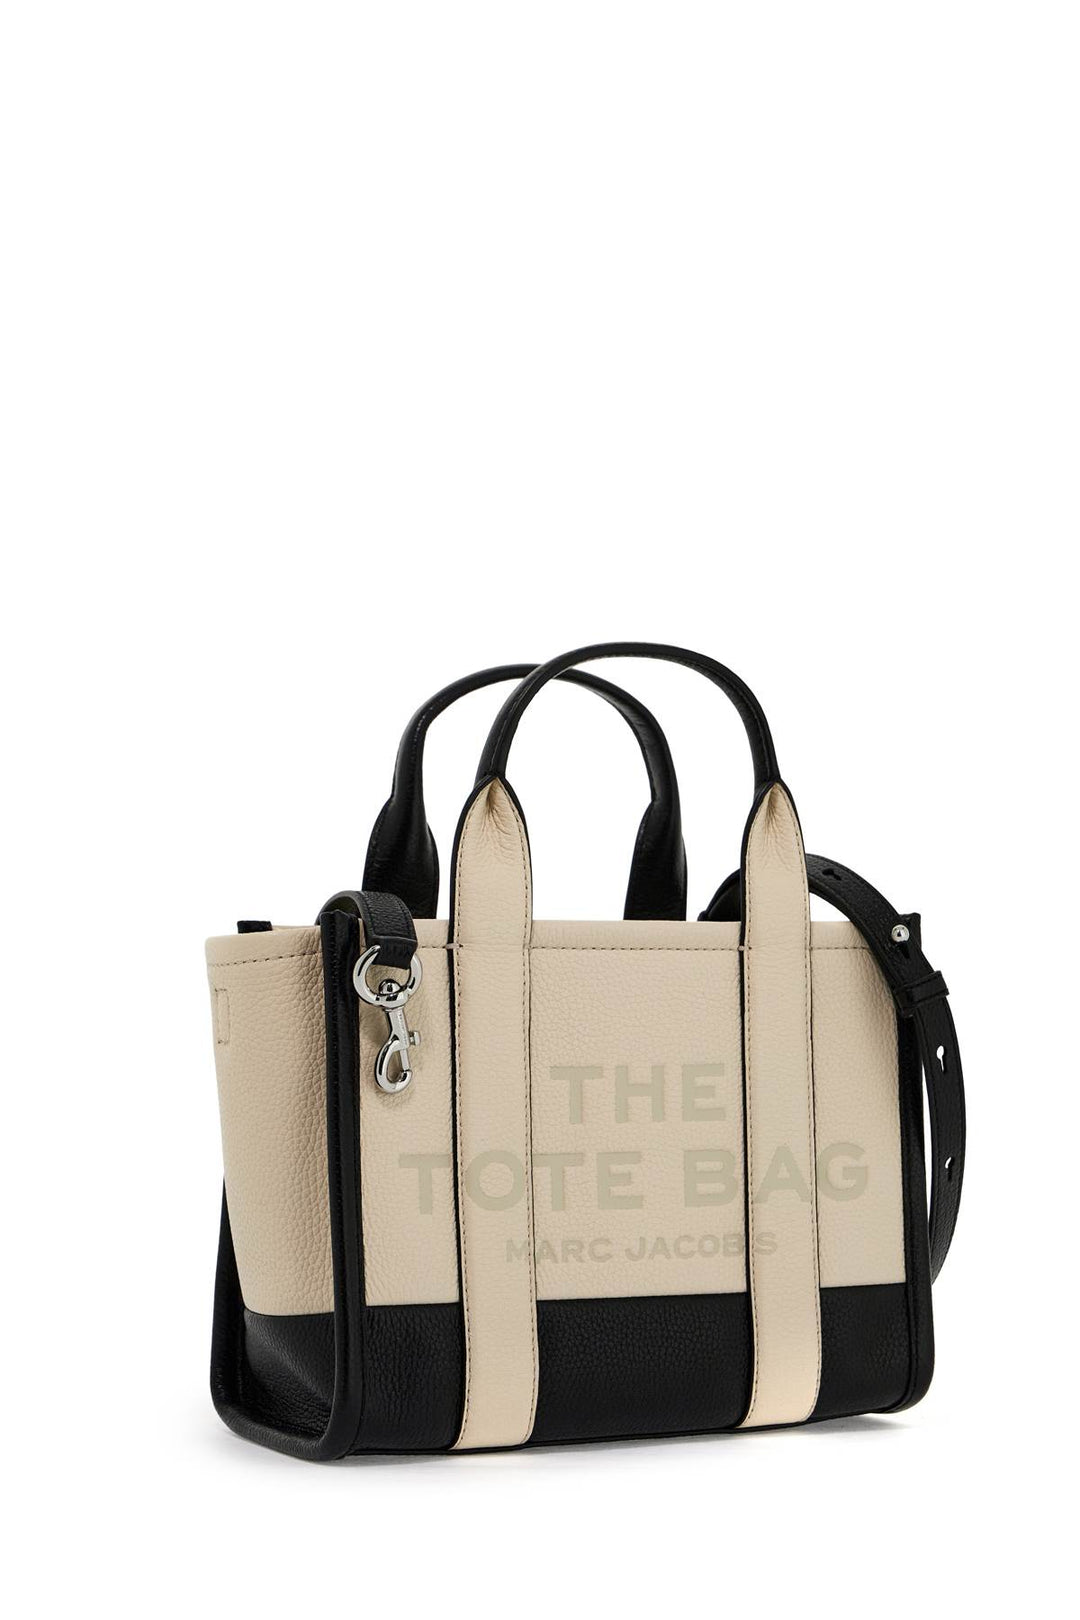 Marc Jacobs The Colorblock Small Tote Bag   White